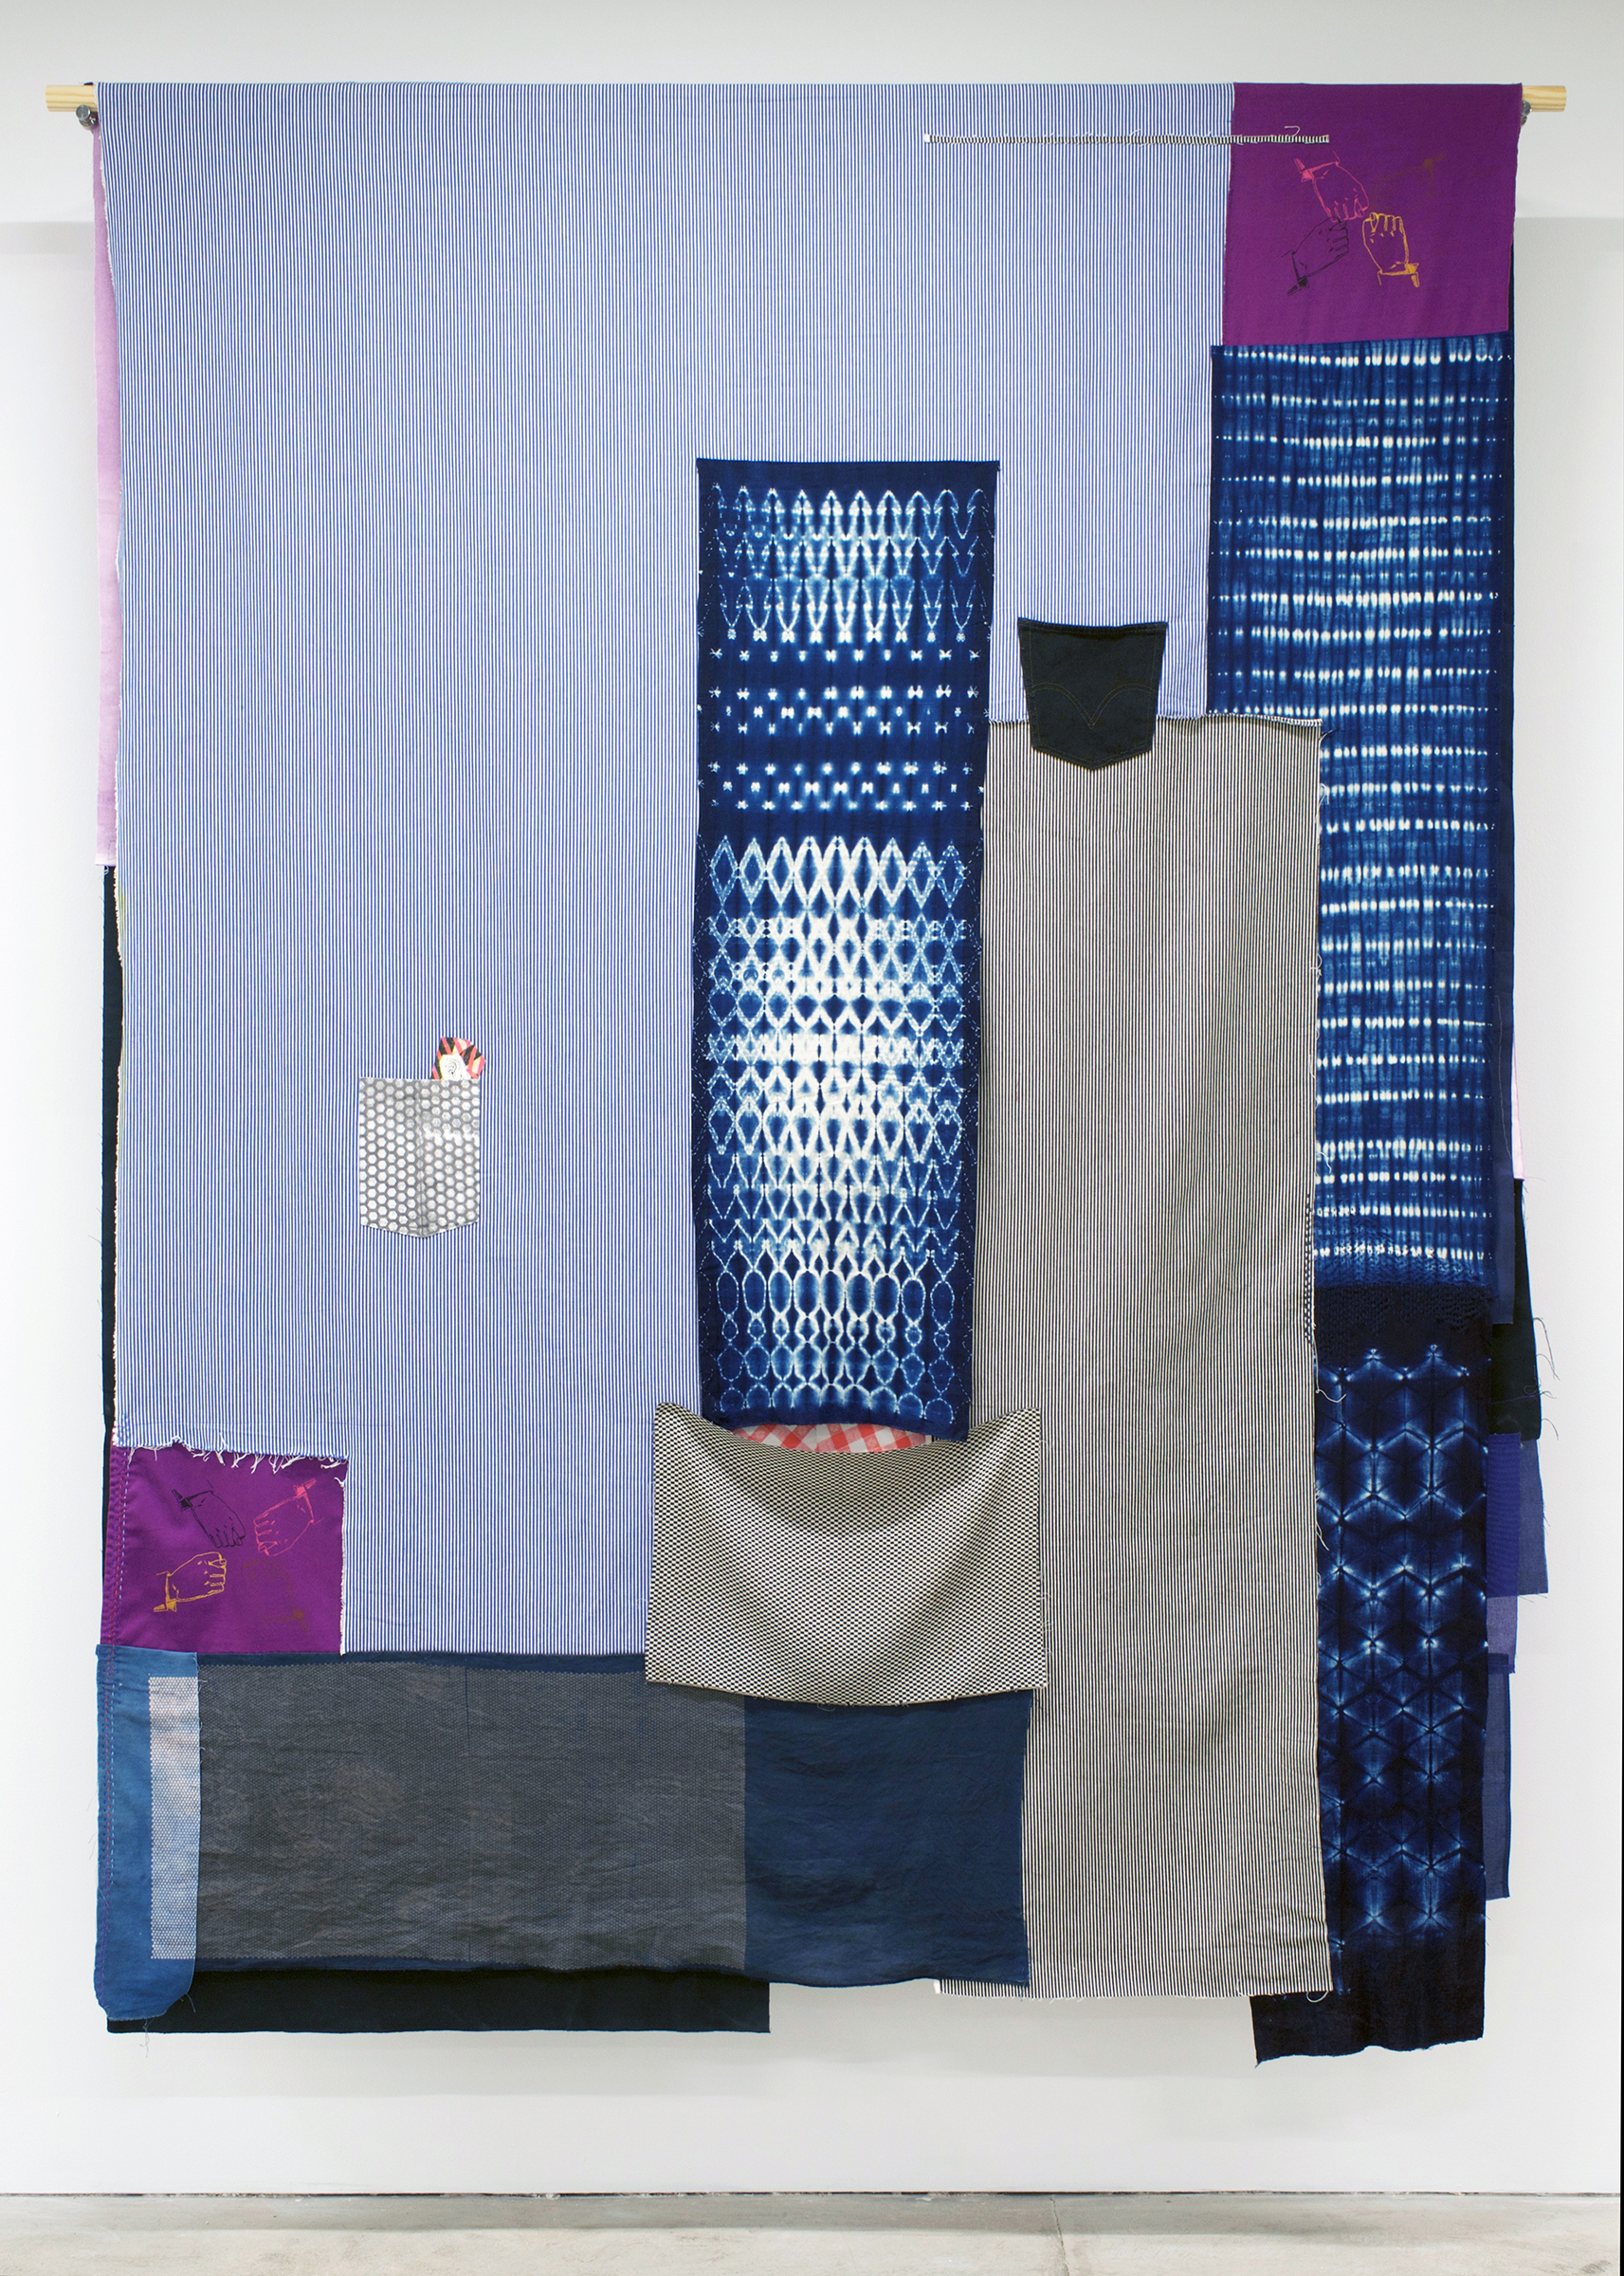  AMANDA CURRERI Gestures (Proteggere, Rubare), 2018 Hand-dyed and hand-printed fabrics with indigo, madder, soot/soya dyes and acrylic on various fabrics such as used tablecloths, vintage Japanese linen, and cotton kimono fabric; vintage Japanese sil